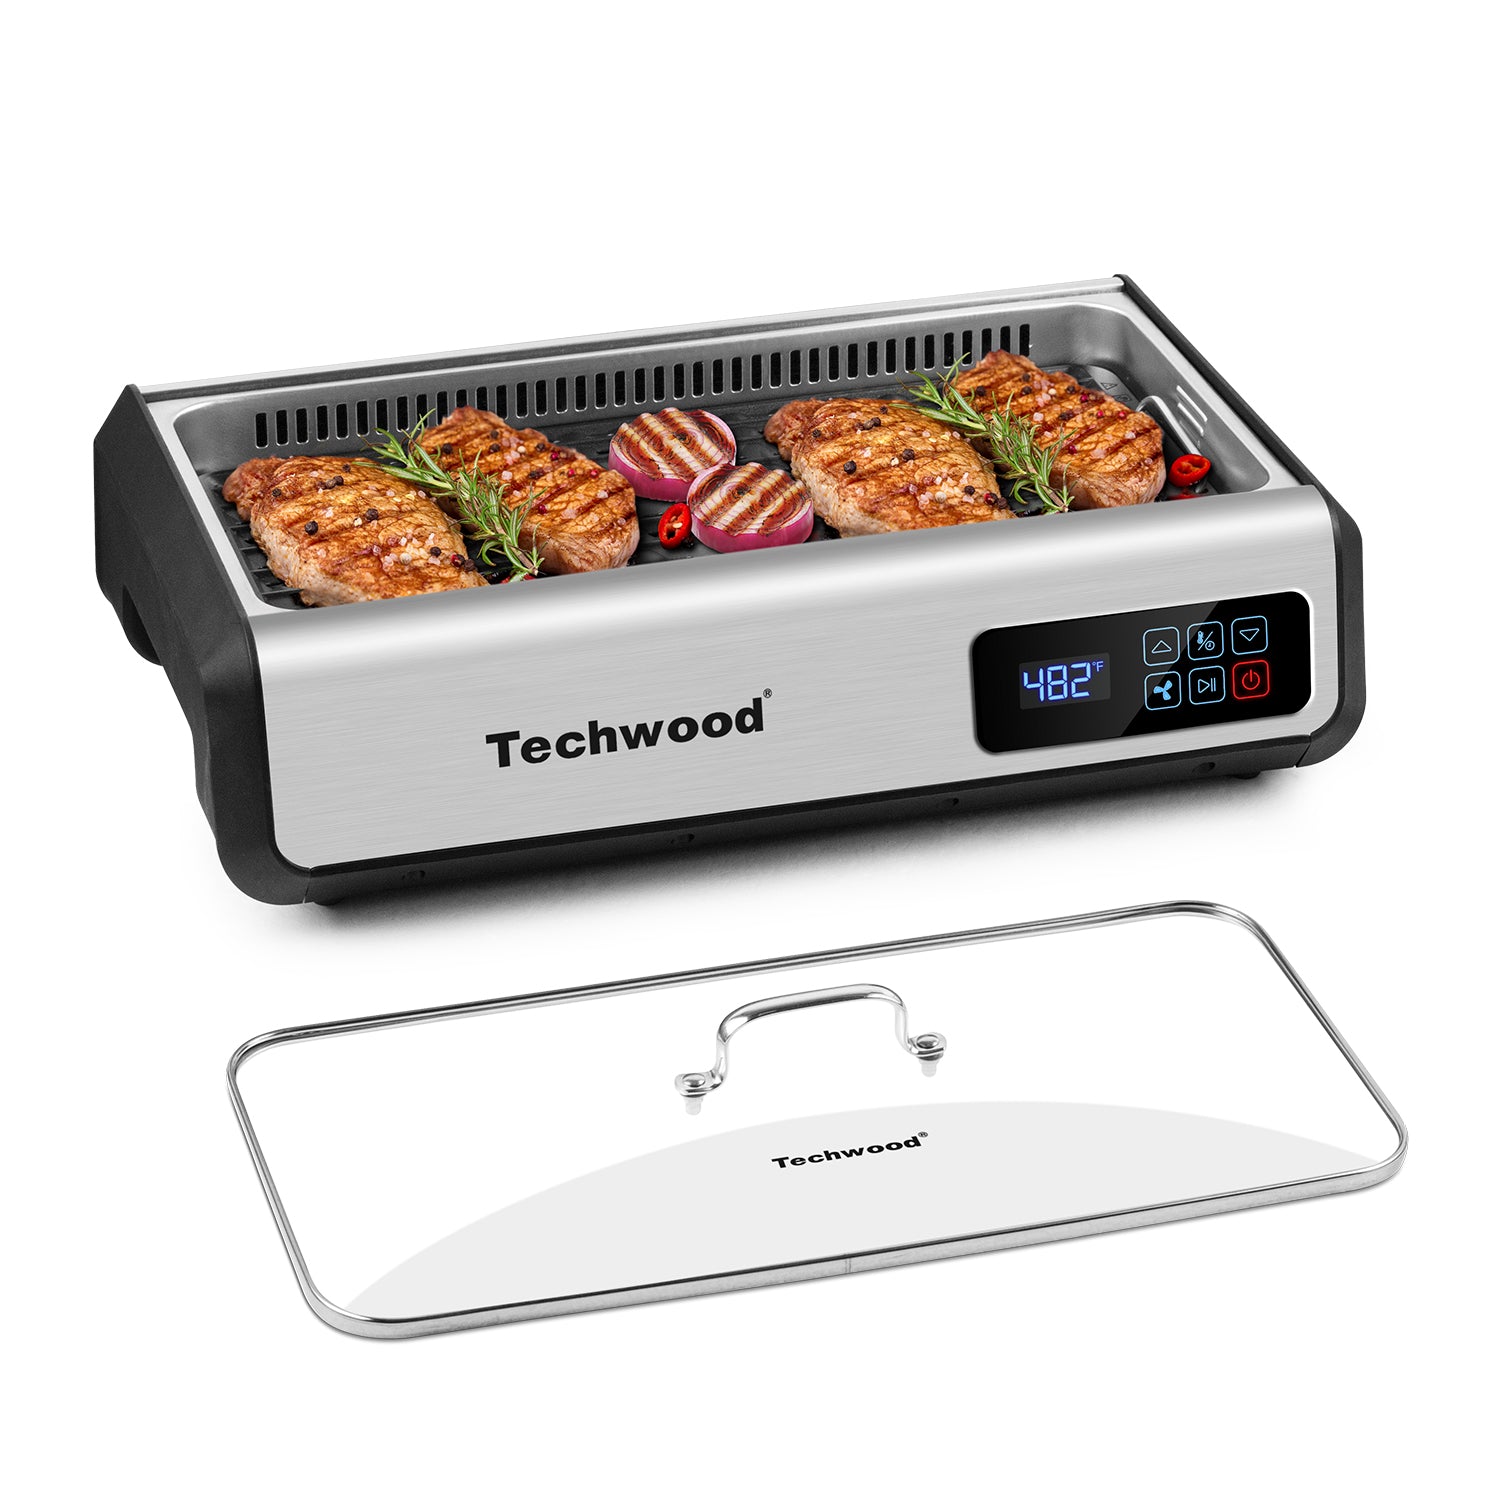 Indoor Smokeless Grill Techwood 1500W Electric Grill with Tempered Glass  Lid & LED Smart Control Panel, 8-Level Control Korean BBQ Grill with